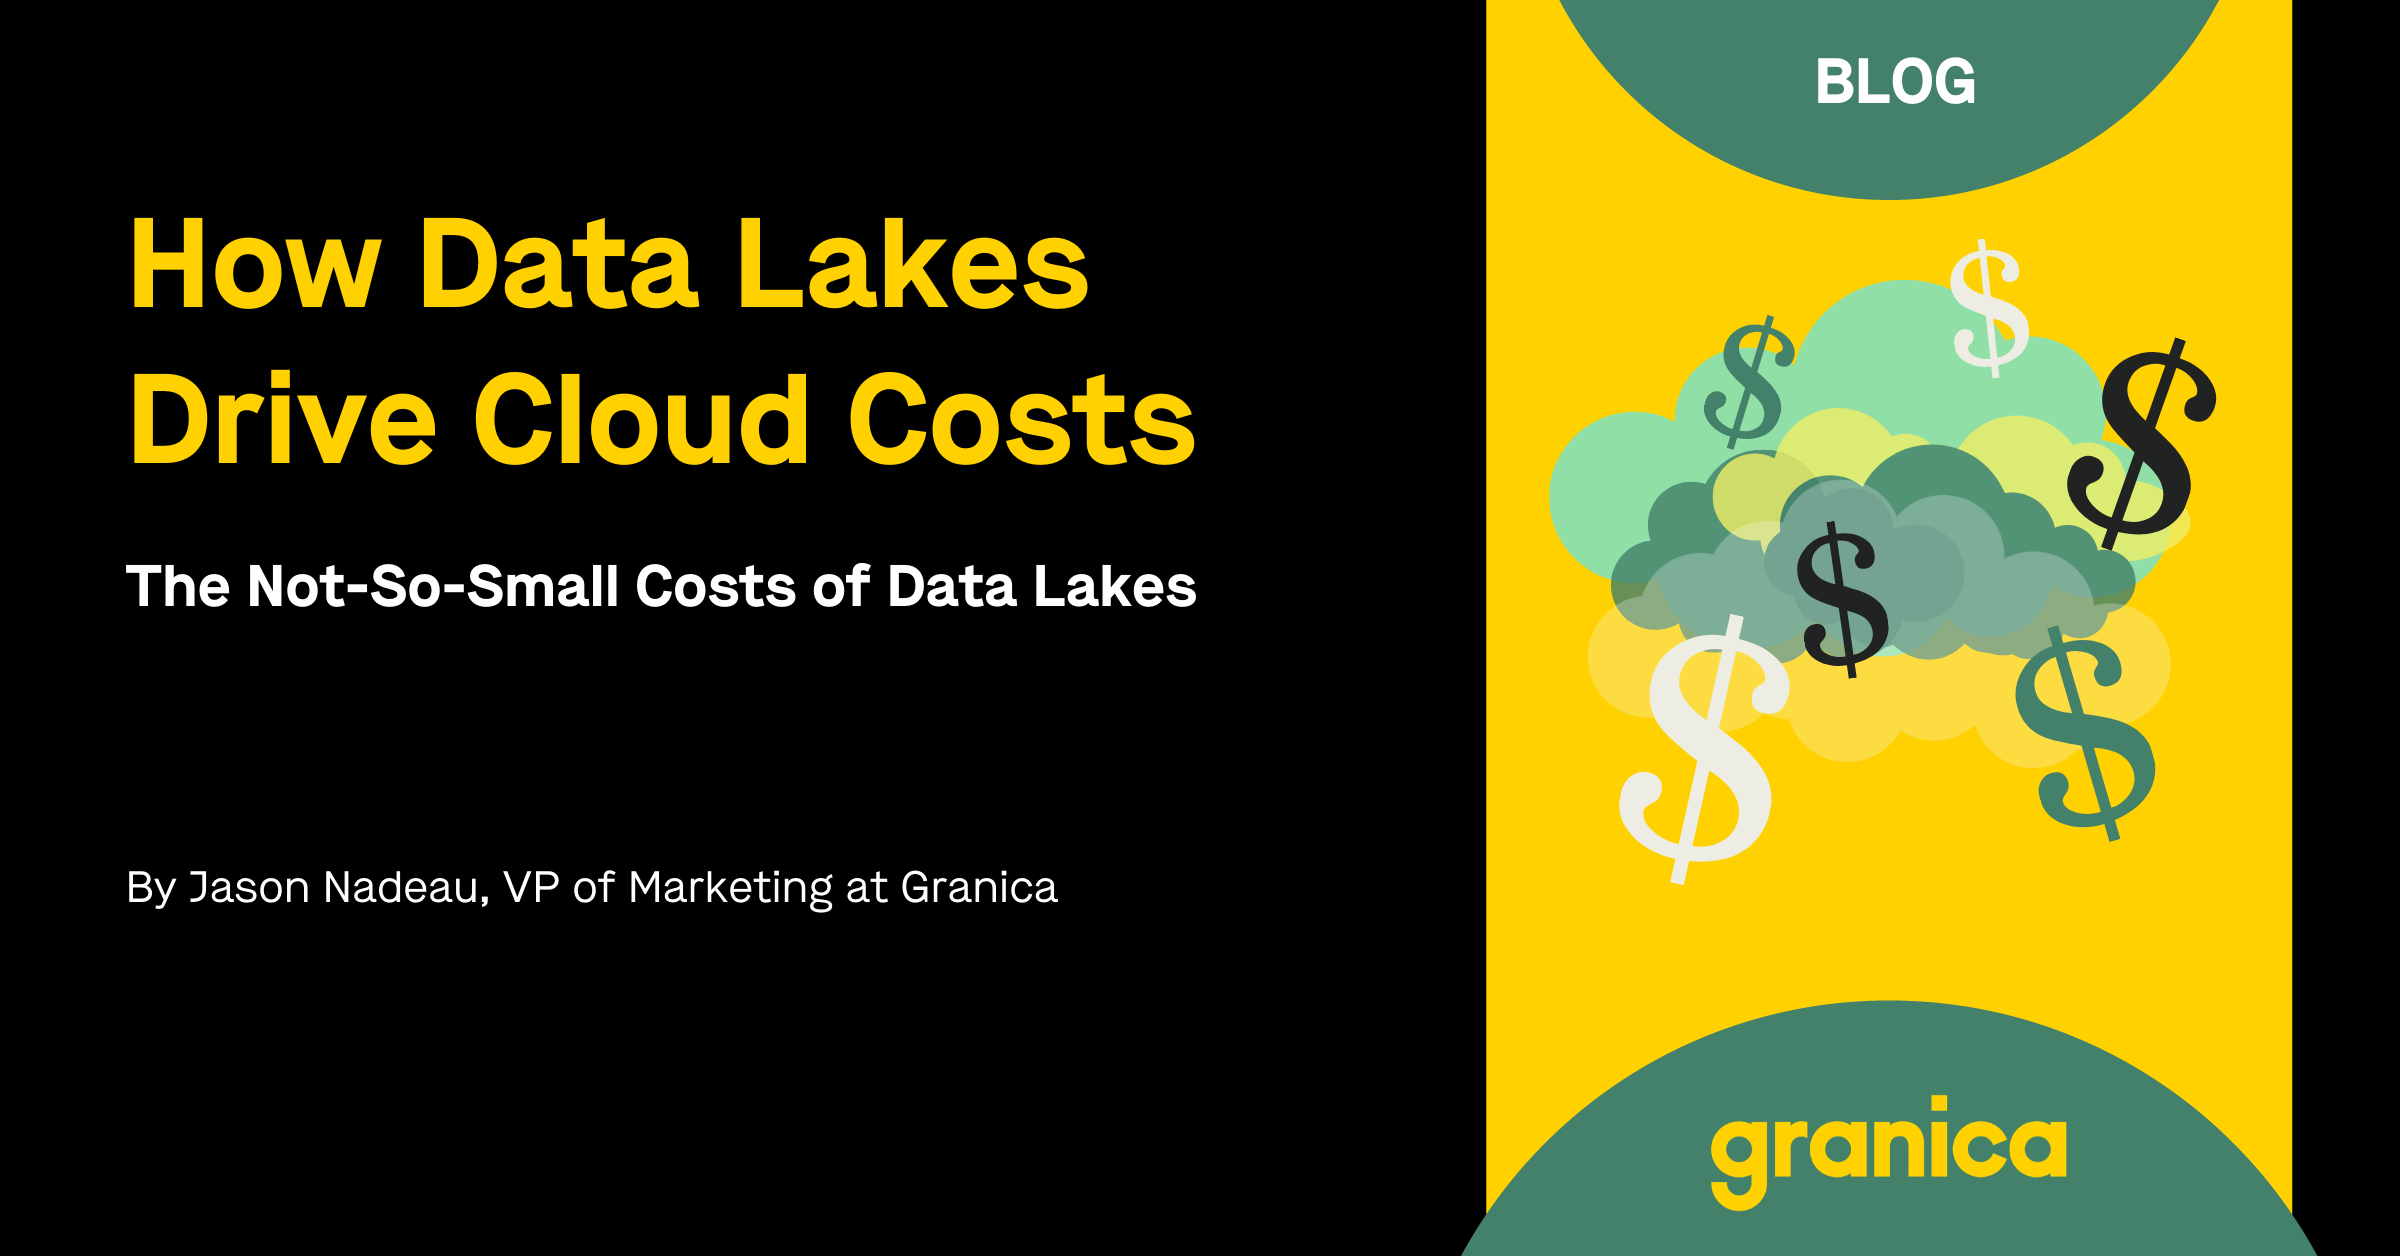 How Data Lakes Drive Cloud Costs